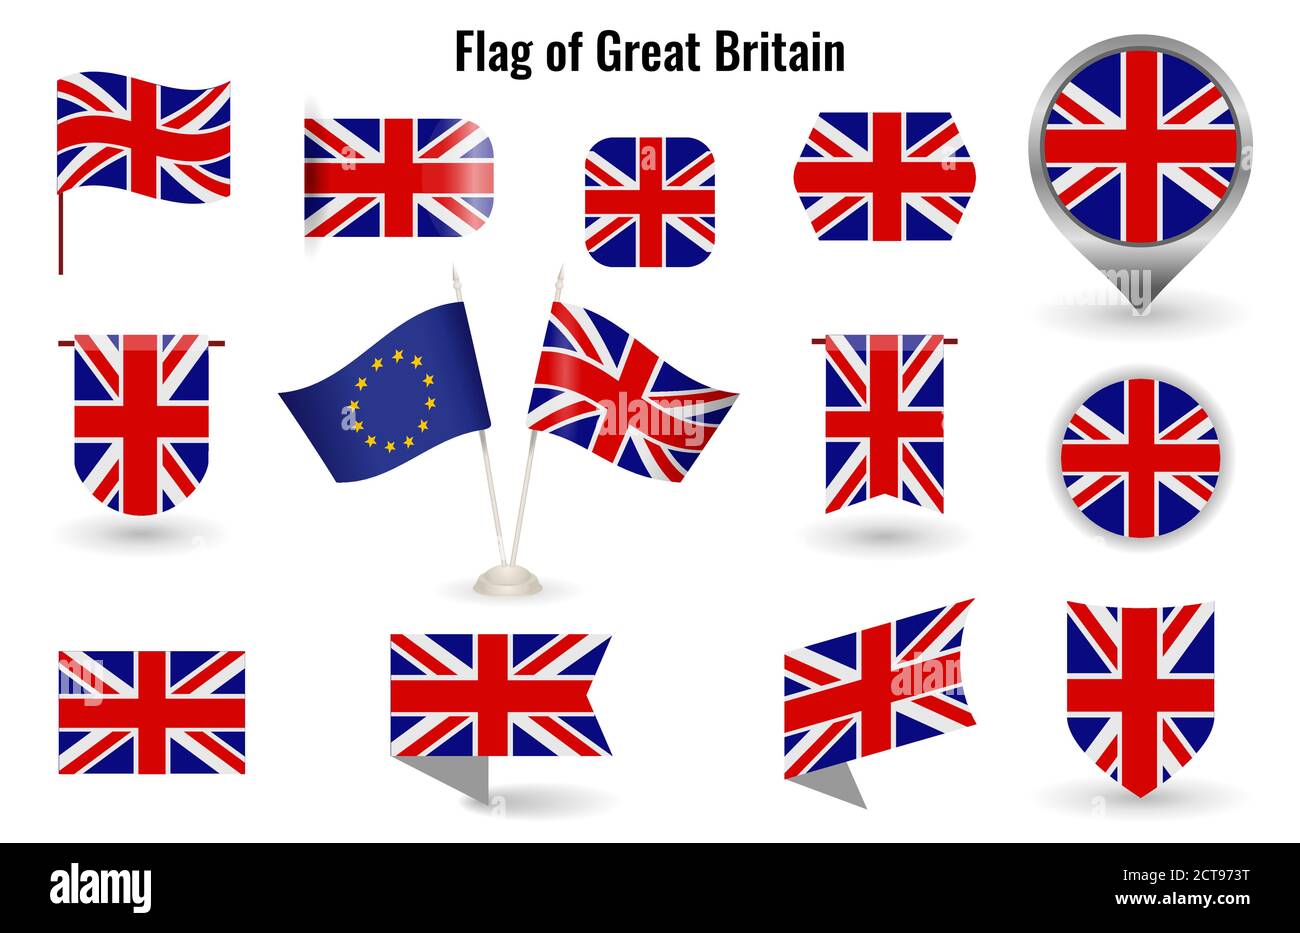 The Flag of Great Britain. Big set of icons and symbols United Kingdom. Square and round England flag. Collection of different flags of horizontal and vertical. Stock Vector